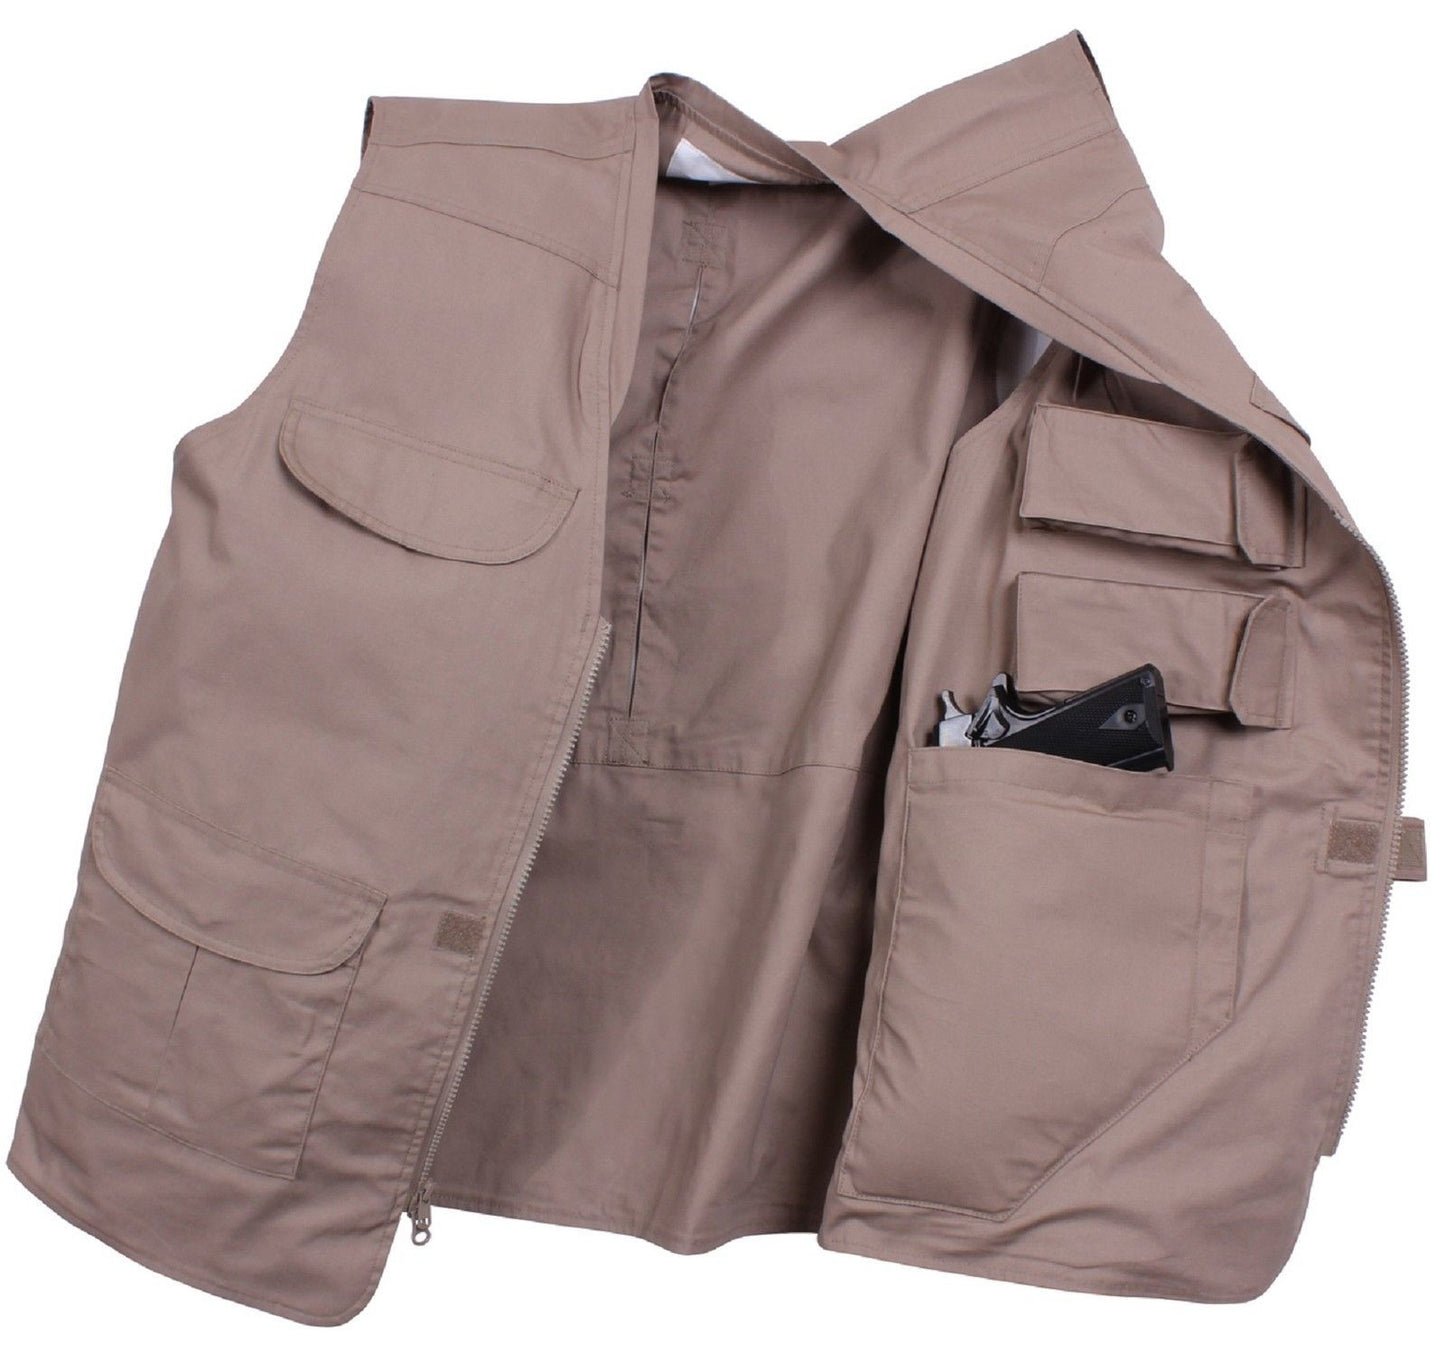 Khaki Lightweight Concealed Carry Vest - Rothco Ambidextrous CCW Tactical Vests